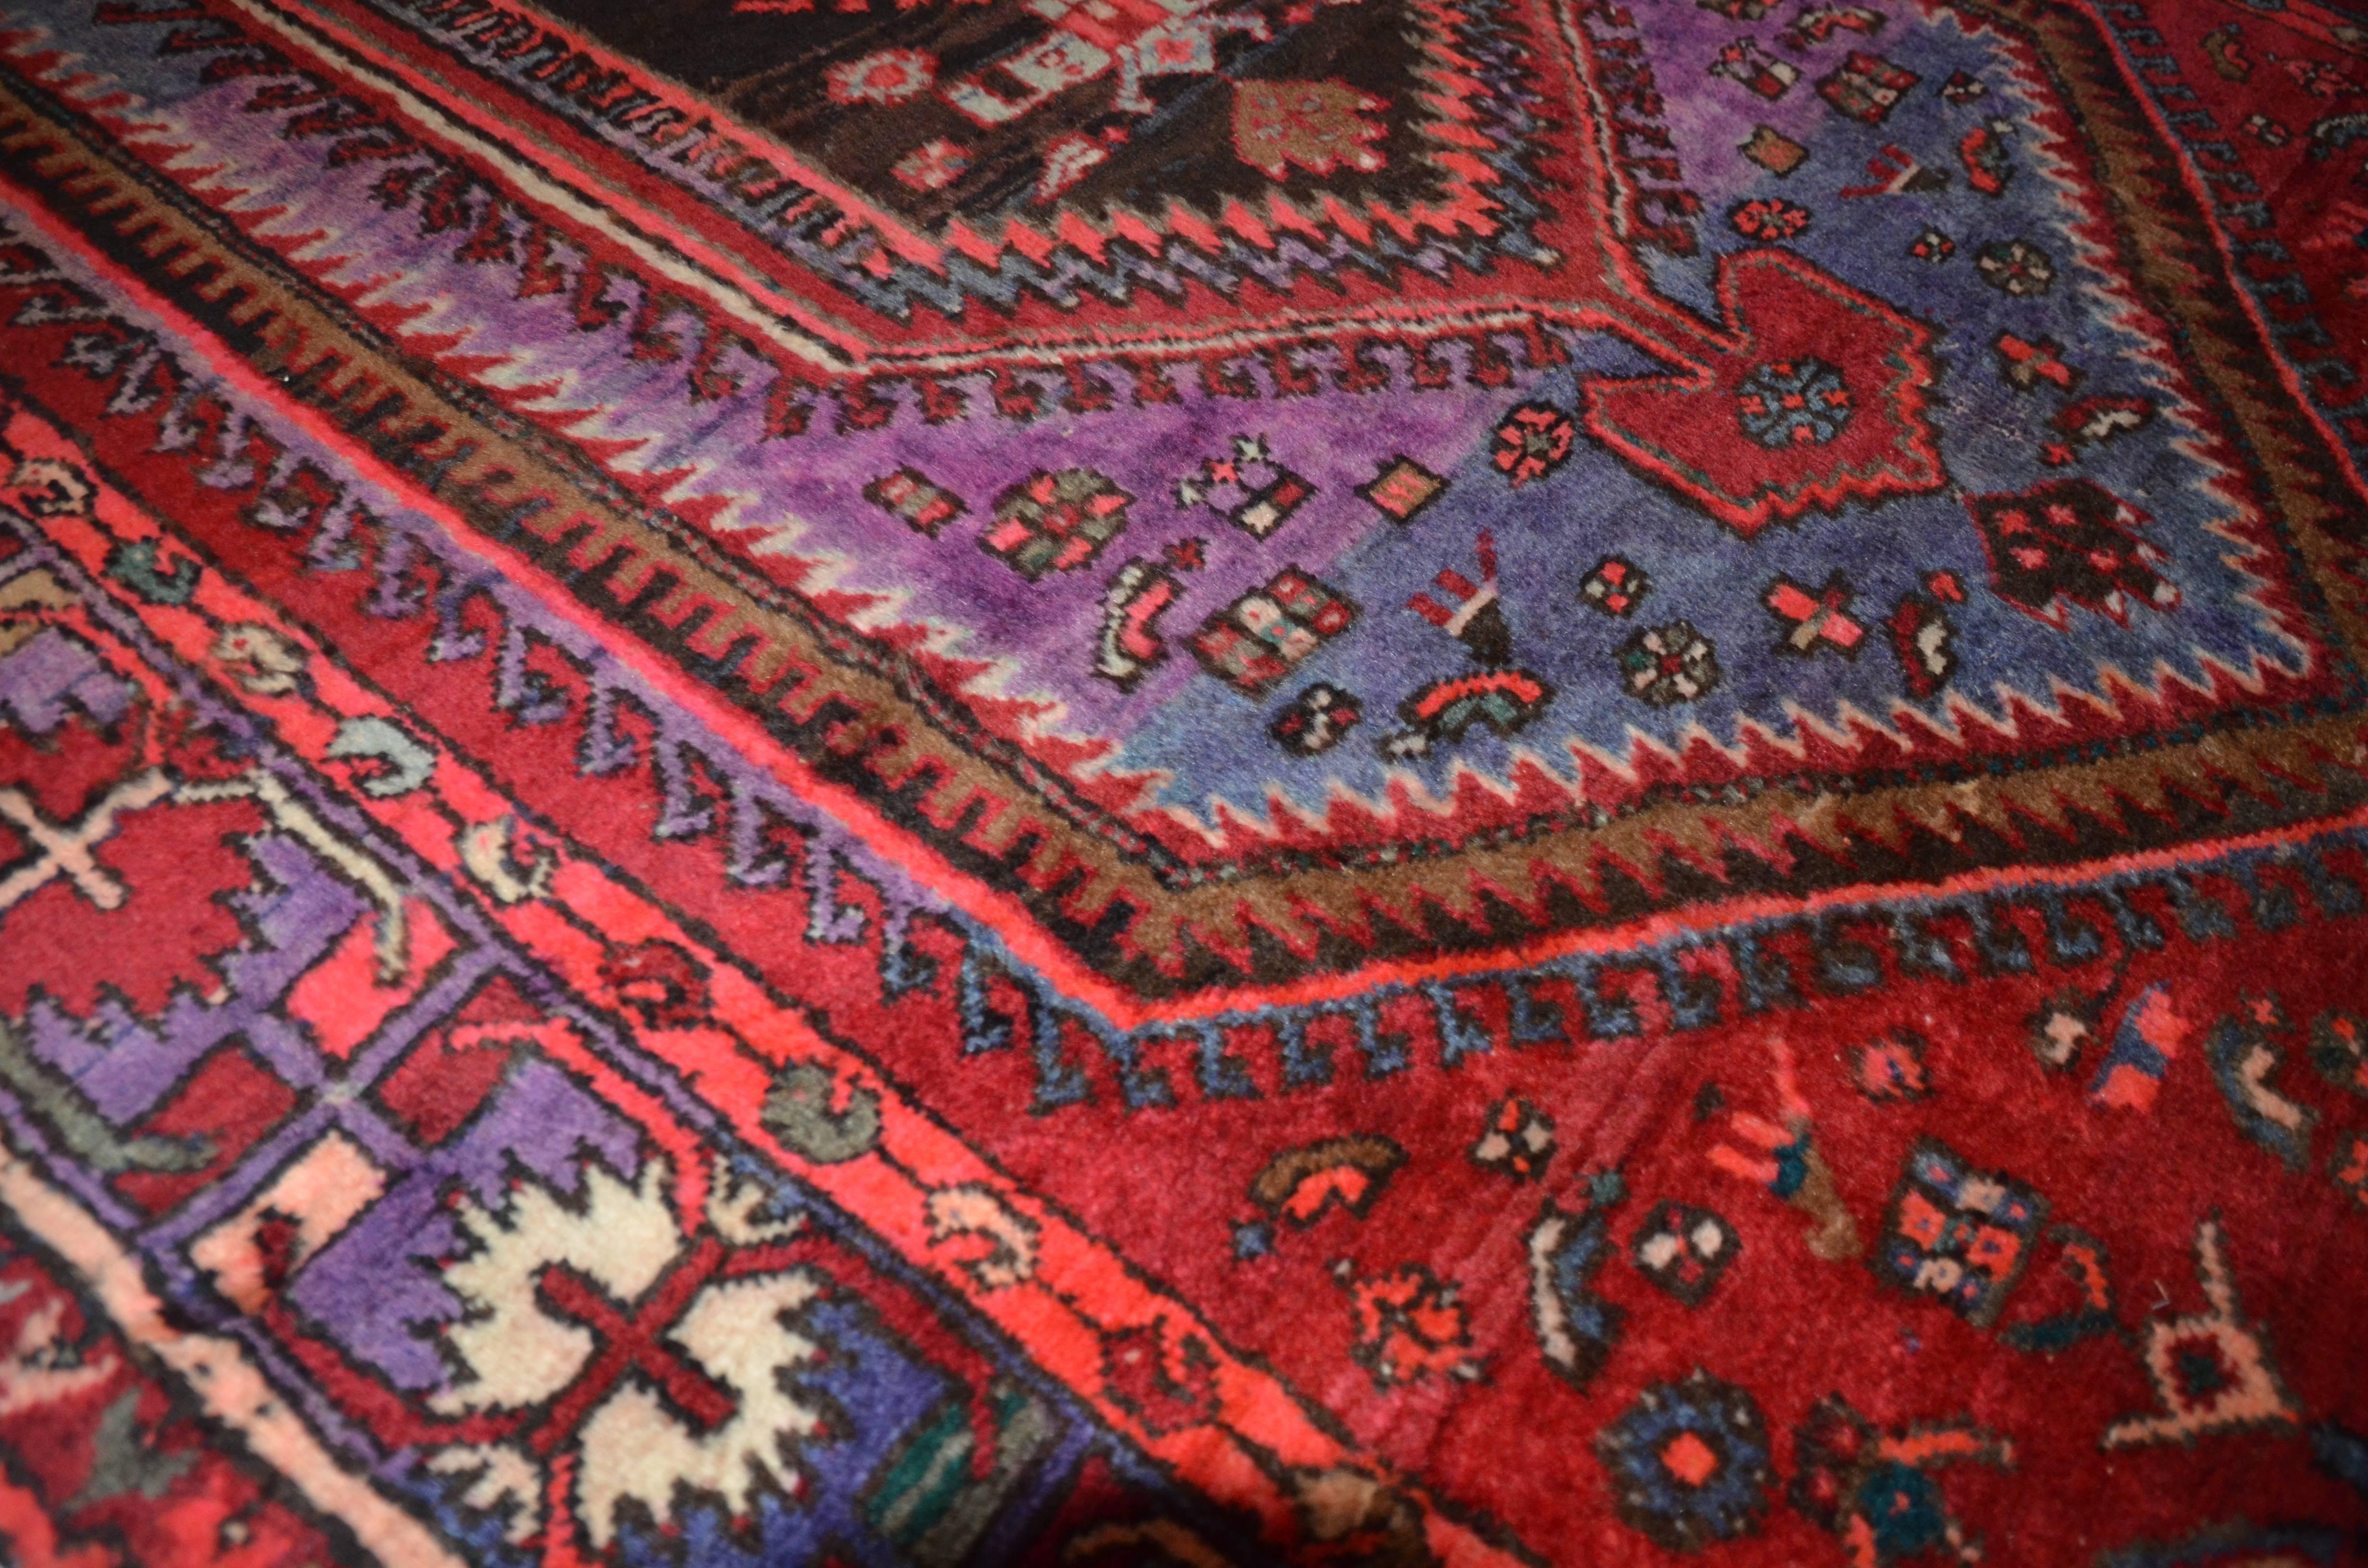 Rug measures 4.5' x 7' foot and features a red ground with purple and blue accents. Nice vintage rug with bright coloring.